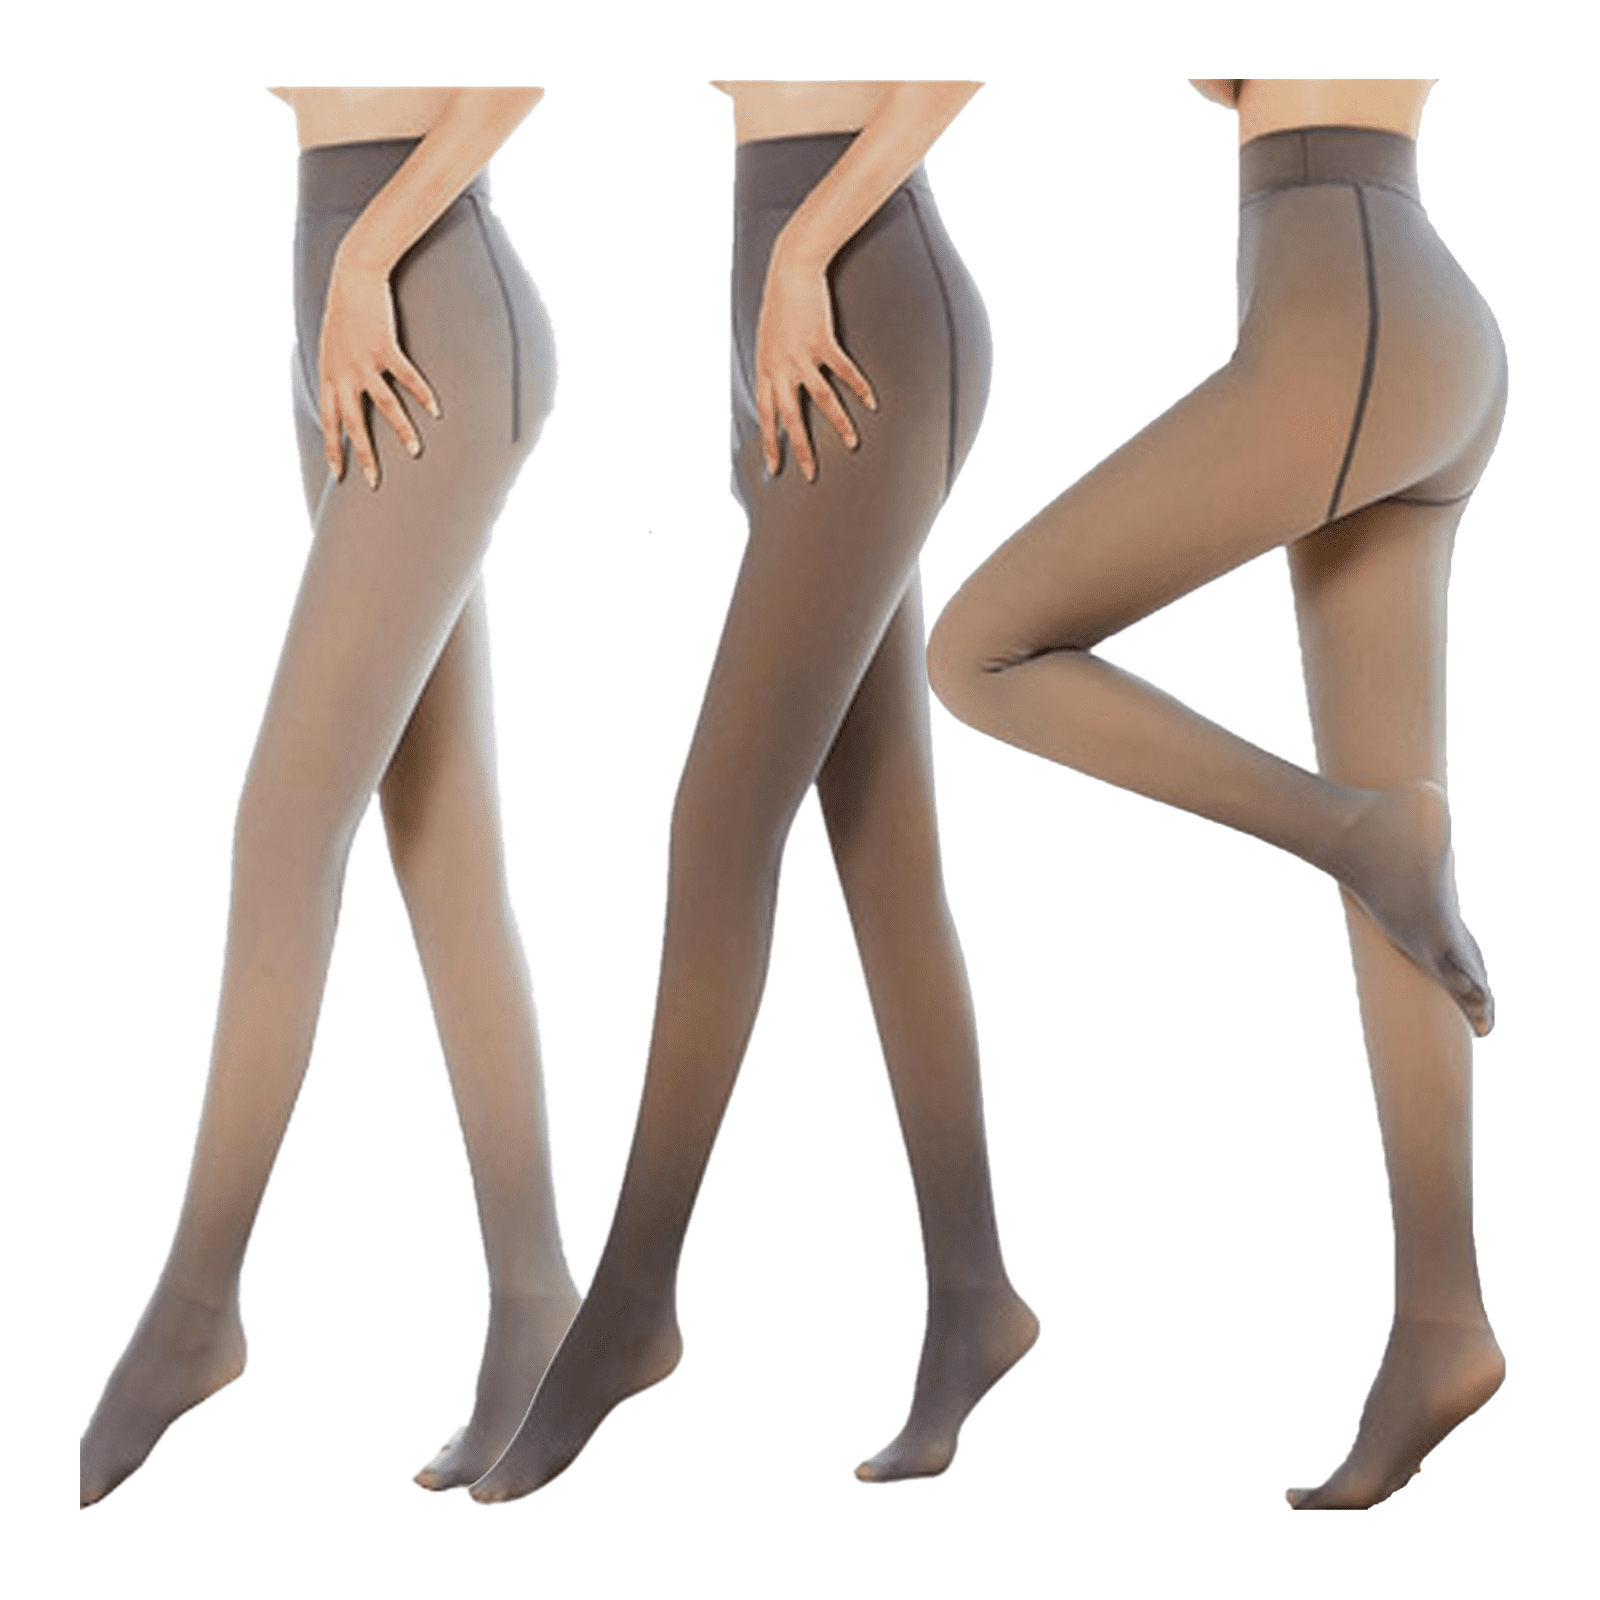  KBVOT Fleece Lined Tights Women Sheer Fake Translucent  Winter Thermal Pantyhose Opaque Warm Thick High Waist Leggings